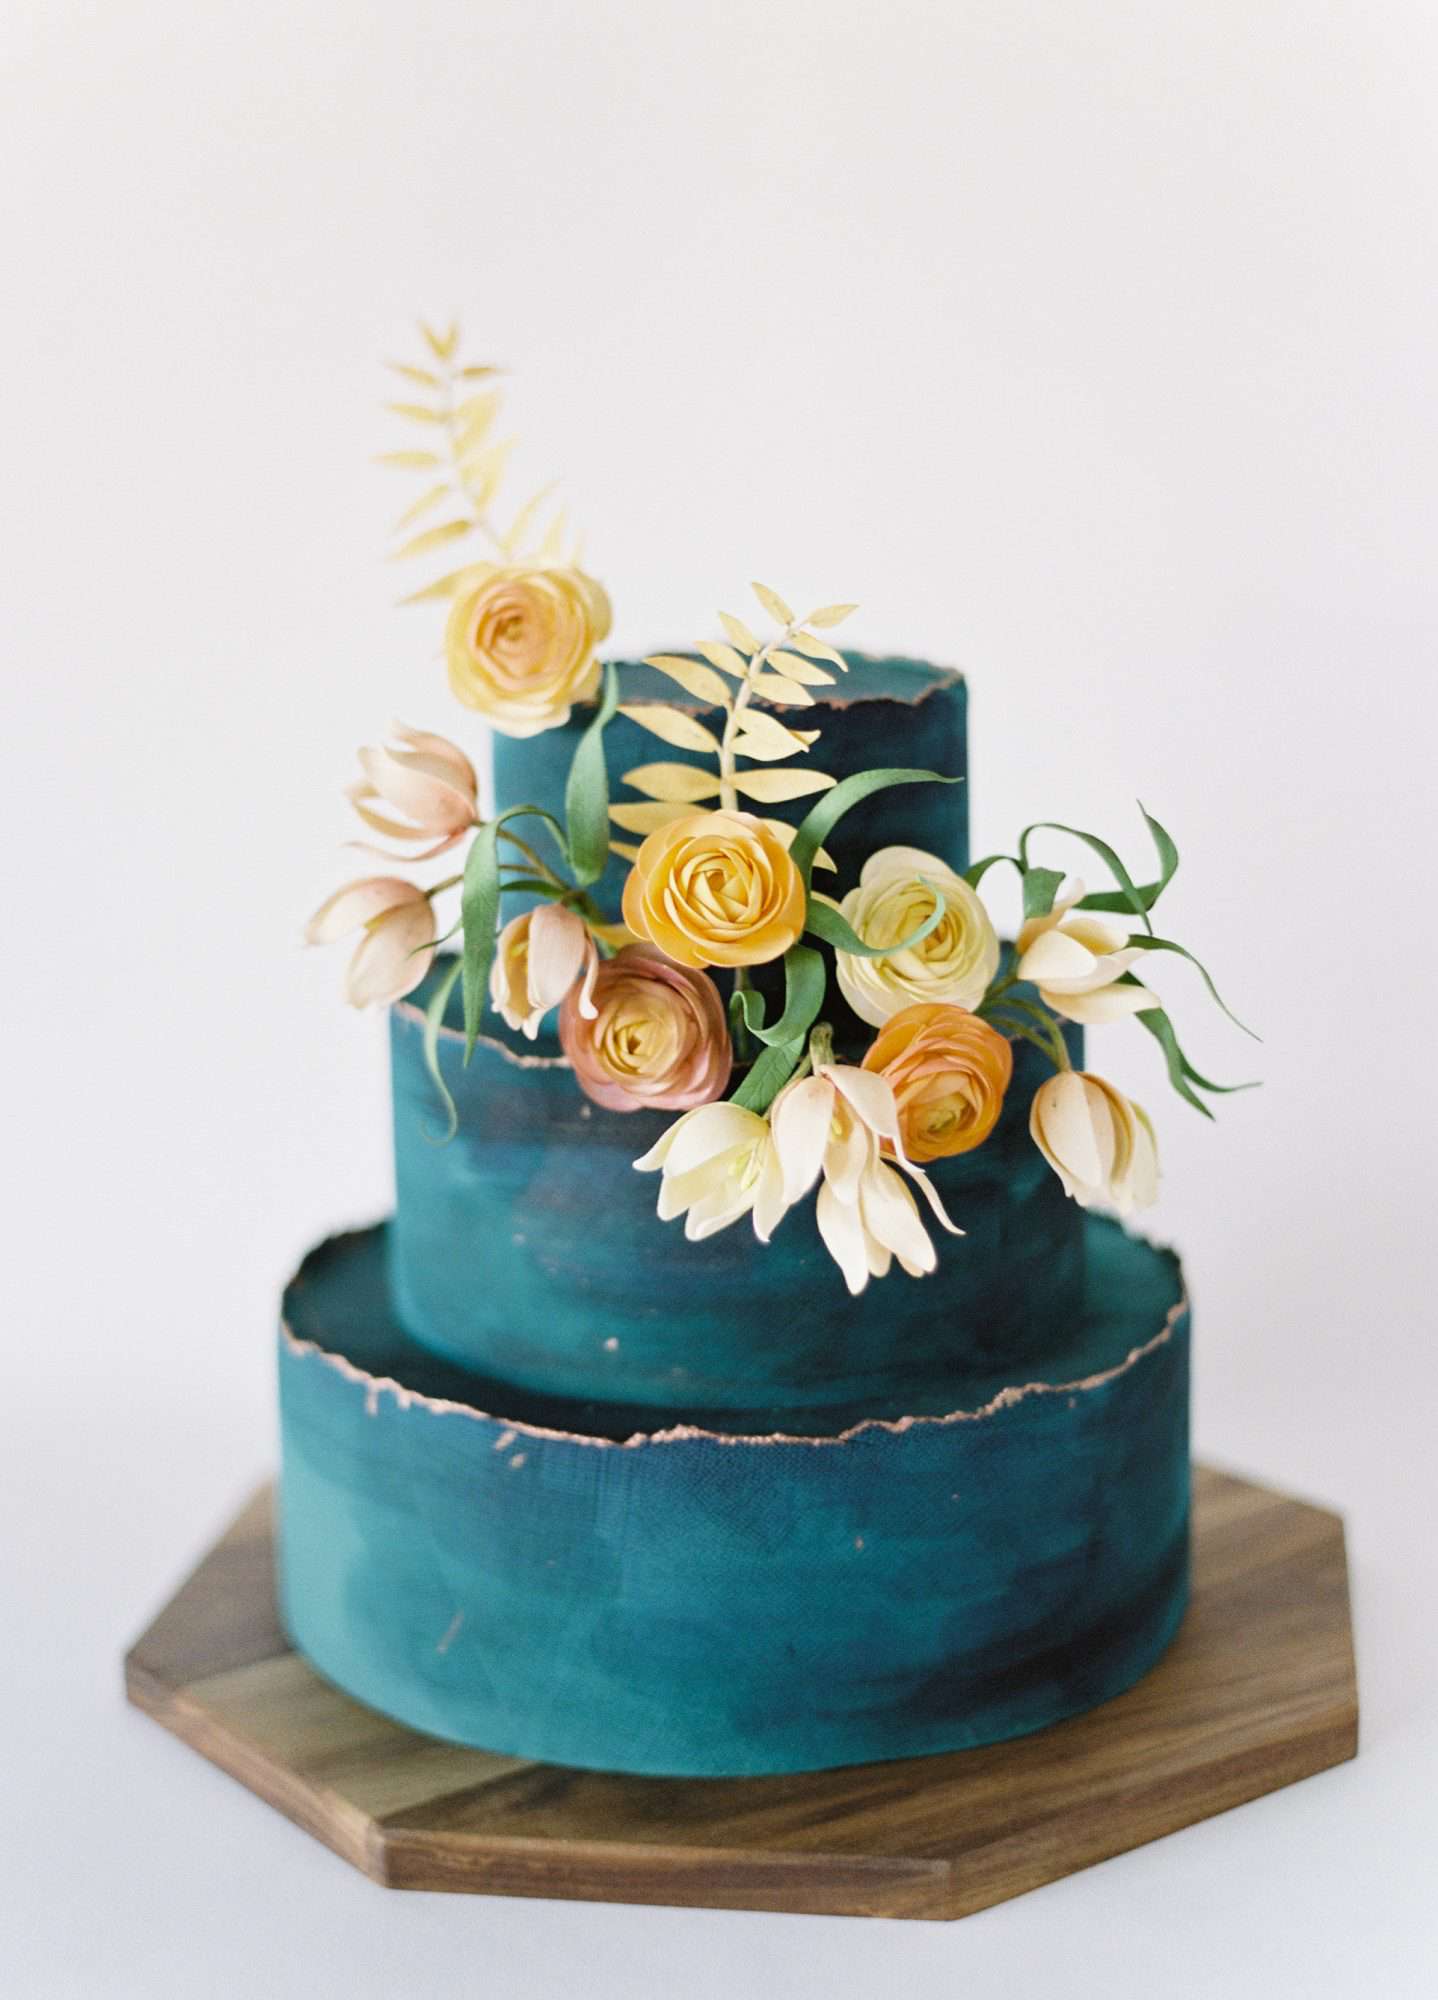 Teal Cake with Deckle-Edge Detail, Fall Wedding Cake Trends